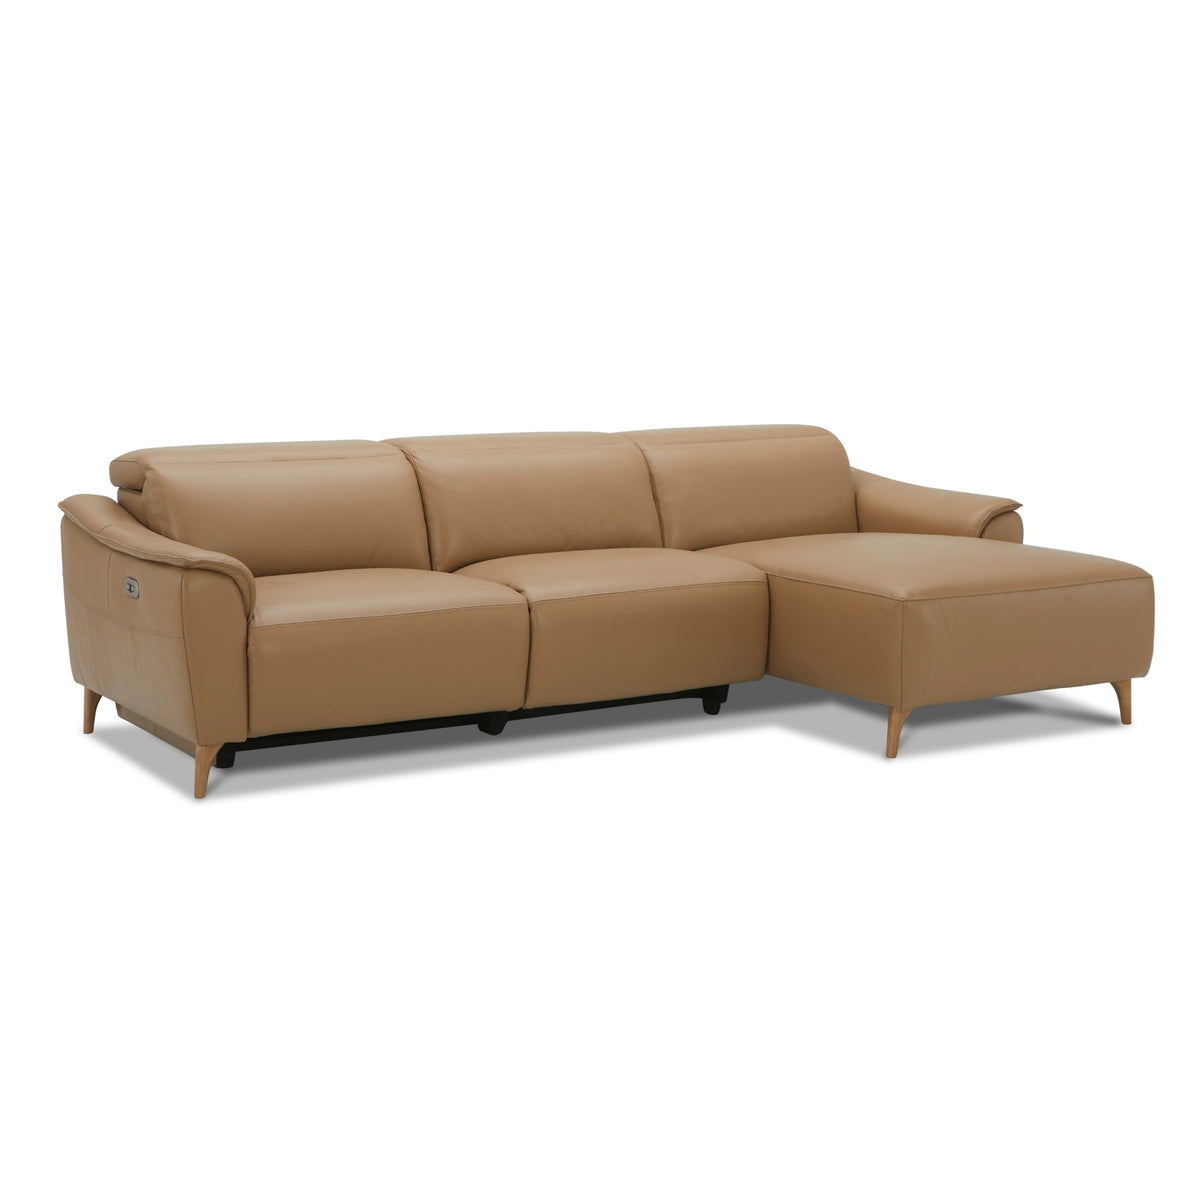 Inala 2 Seater Leather Electric Recliner Chaise Sofa Latte Right